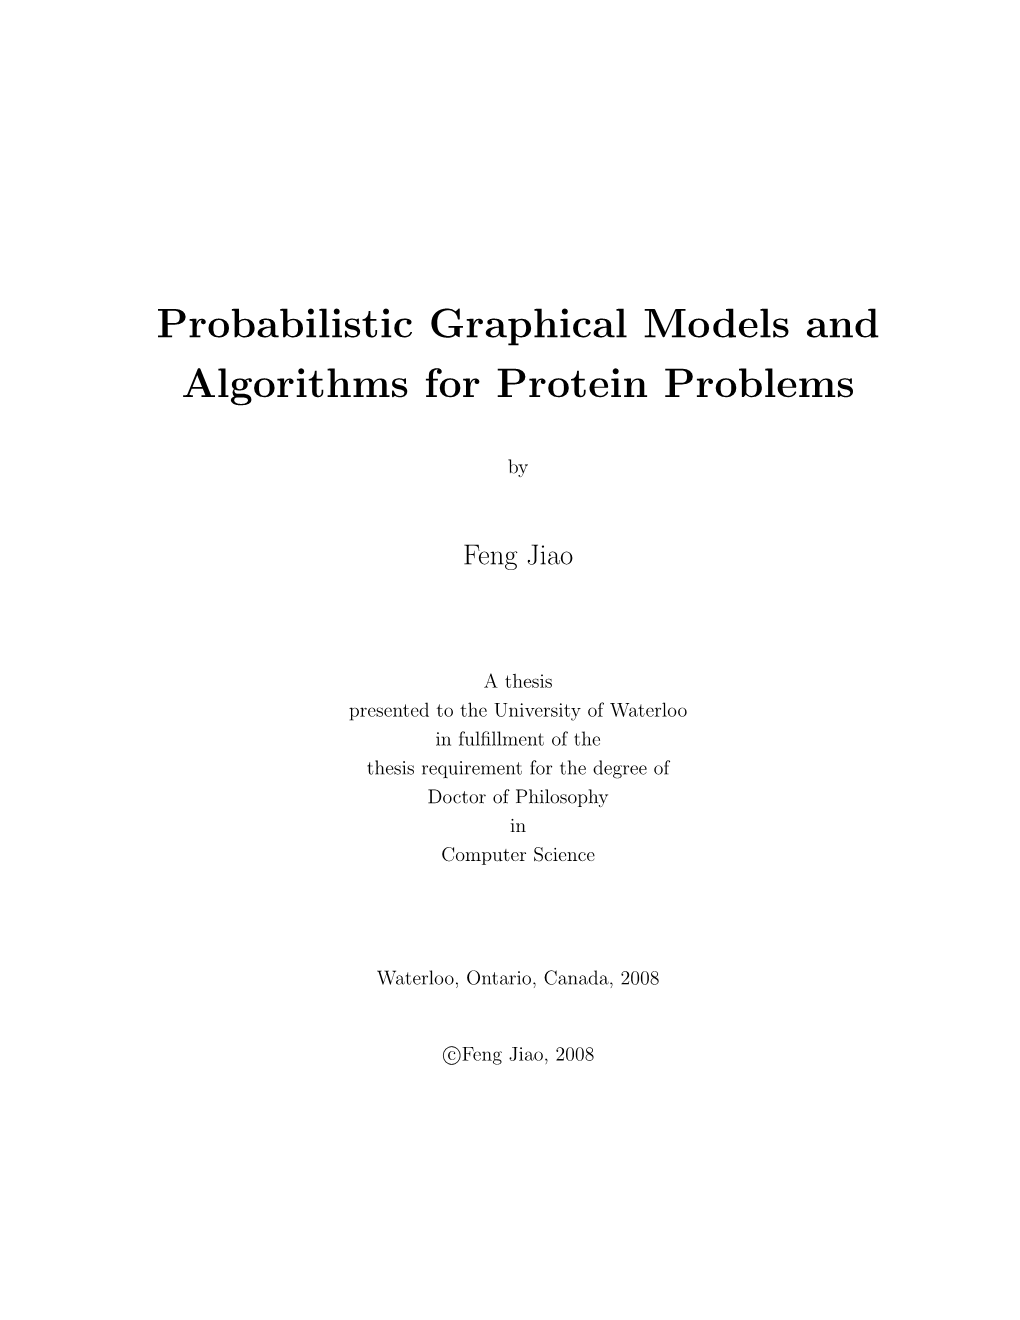 Probabilistic Graphical Models and Algorithms for Protein Problems